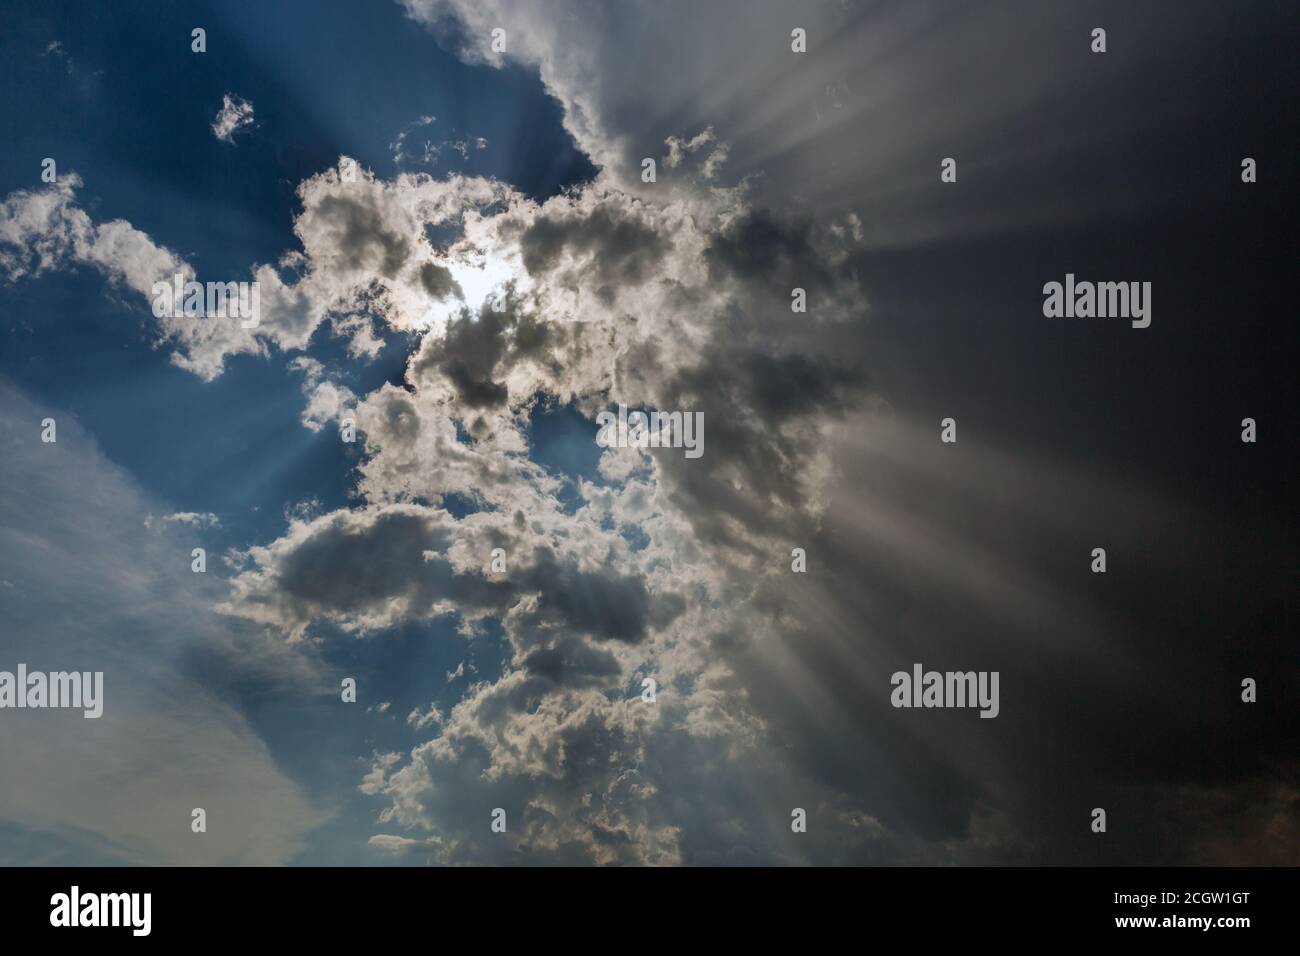 sky with cloud covers the sun rapidly, rays of light Stock Photo